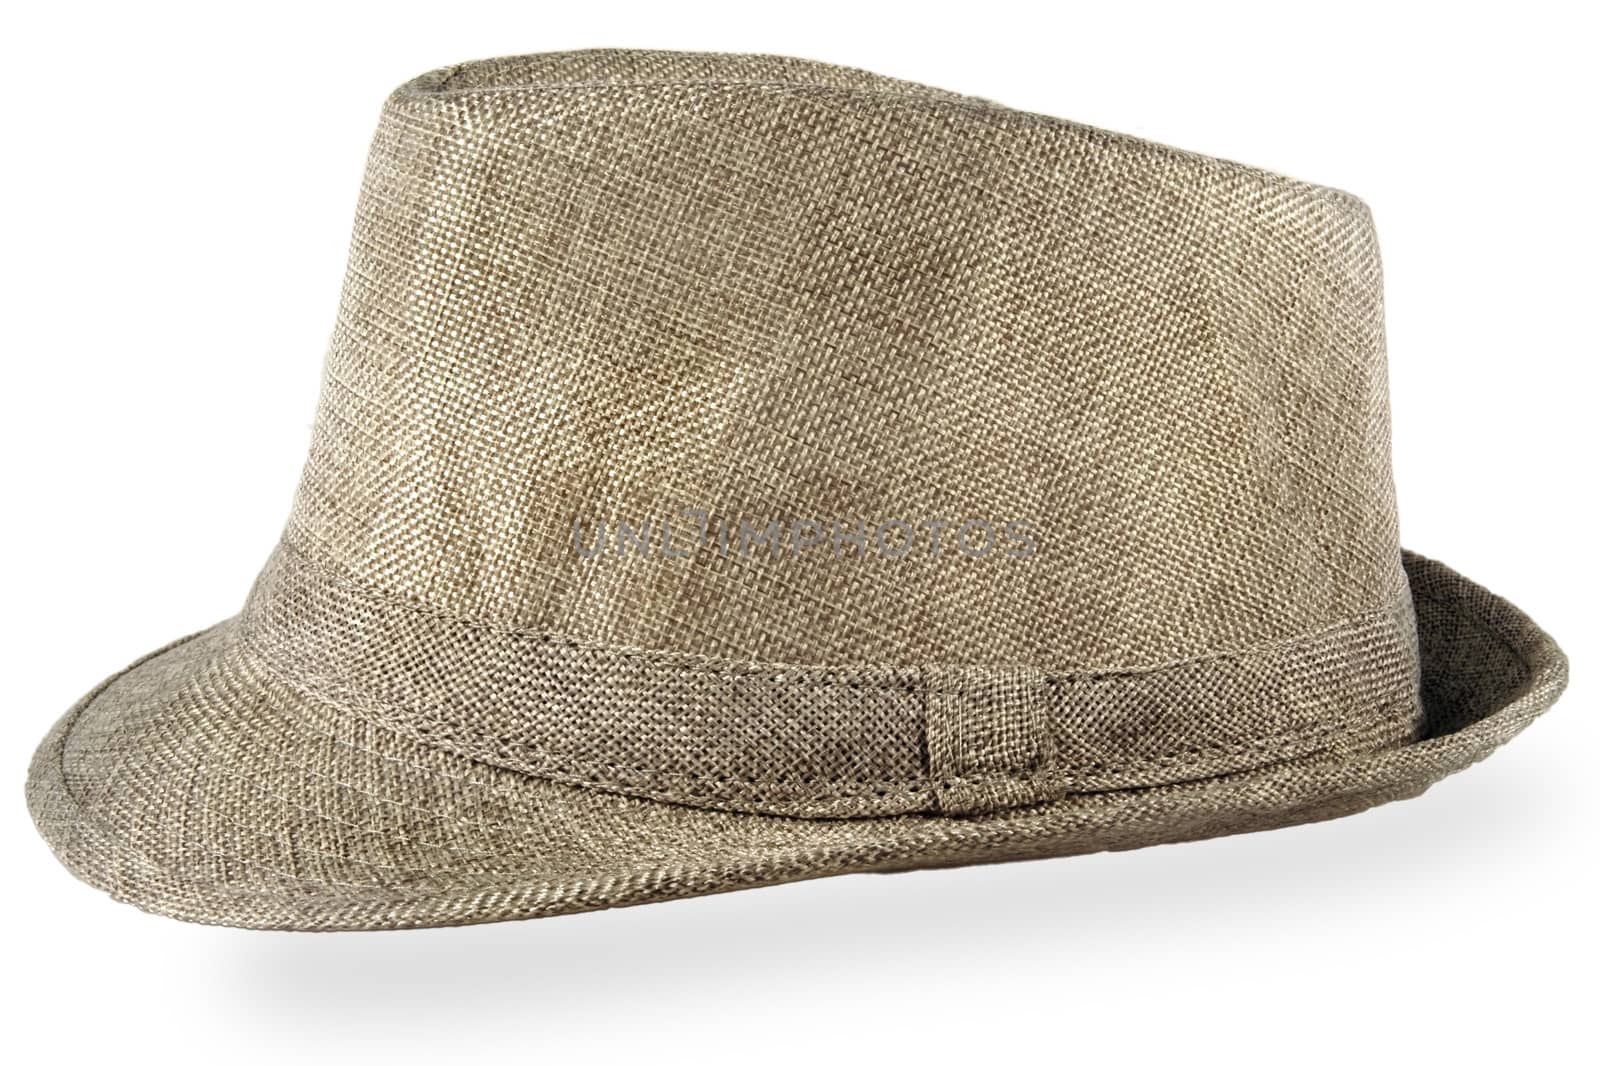 Men's classic hat isolated on white background         